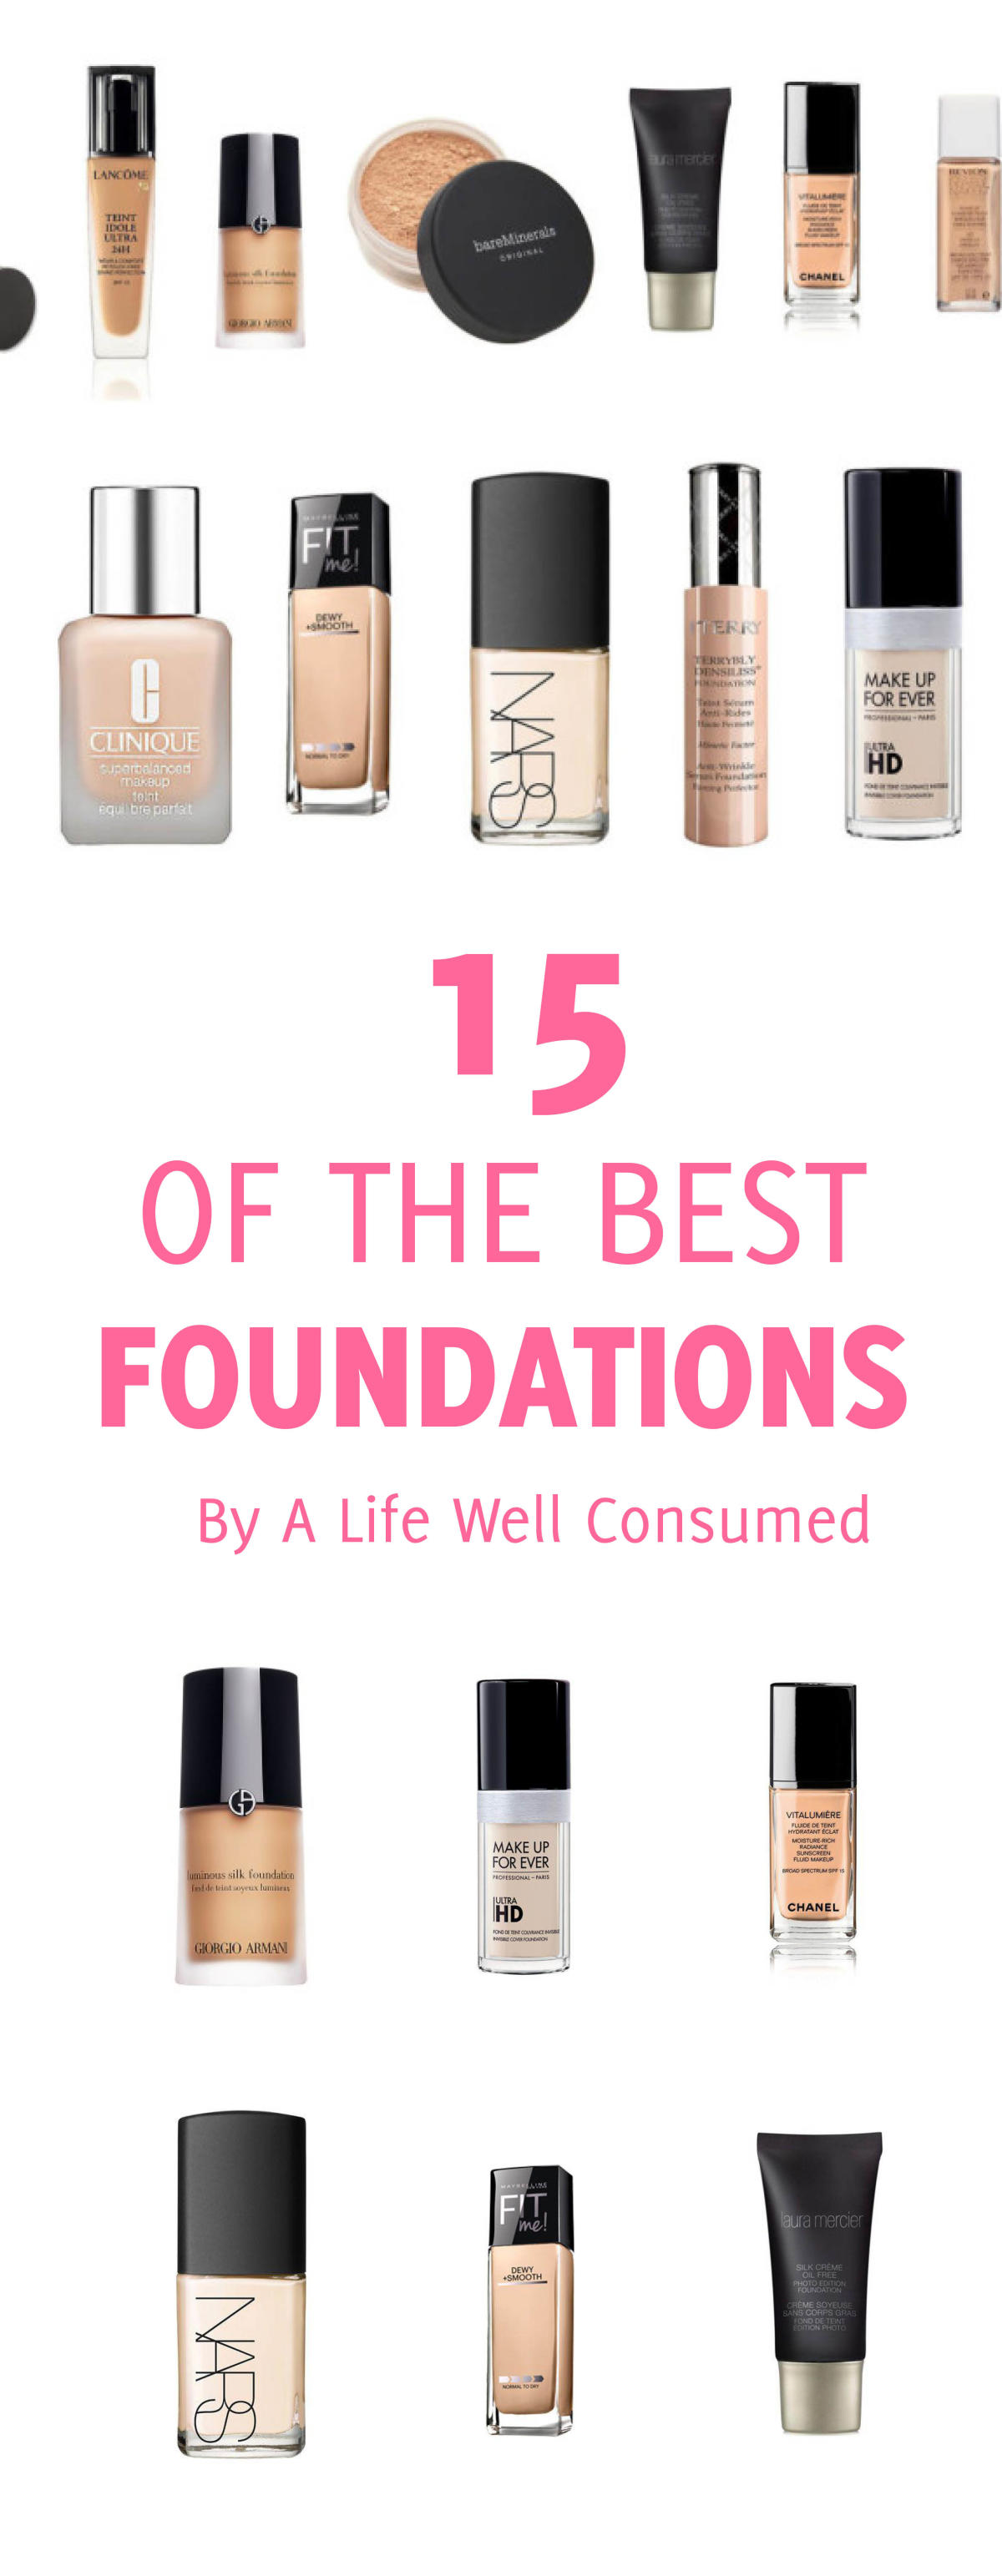 15 of the best foundations